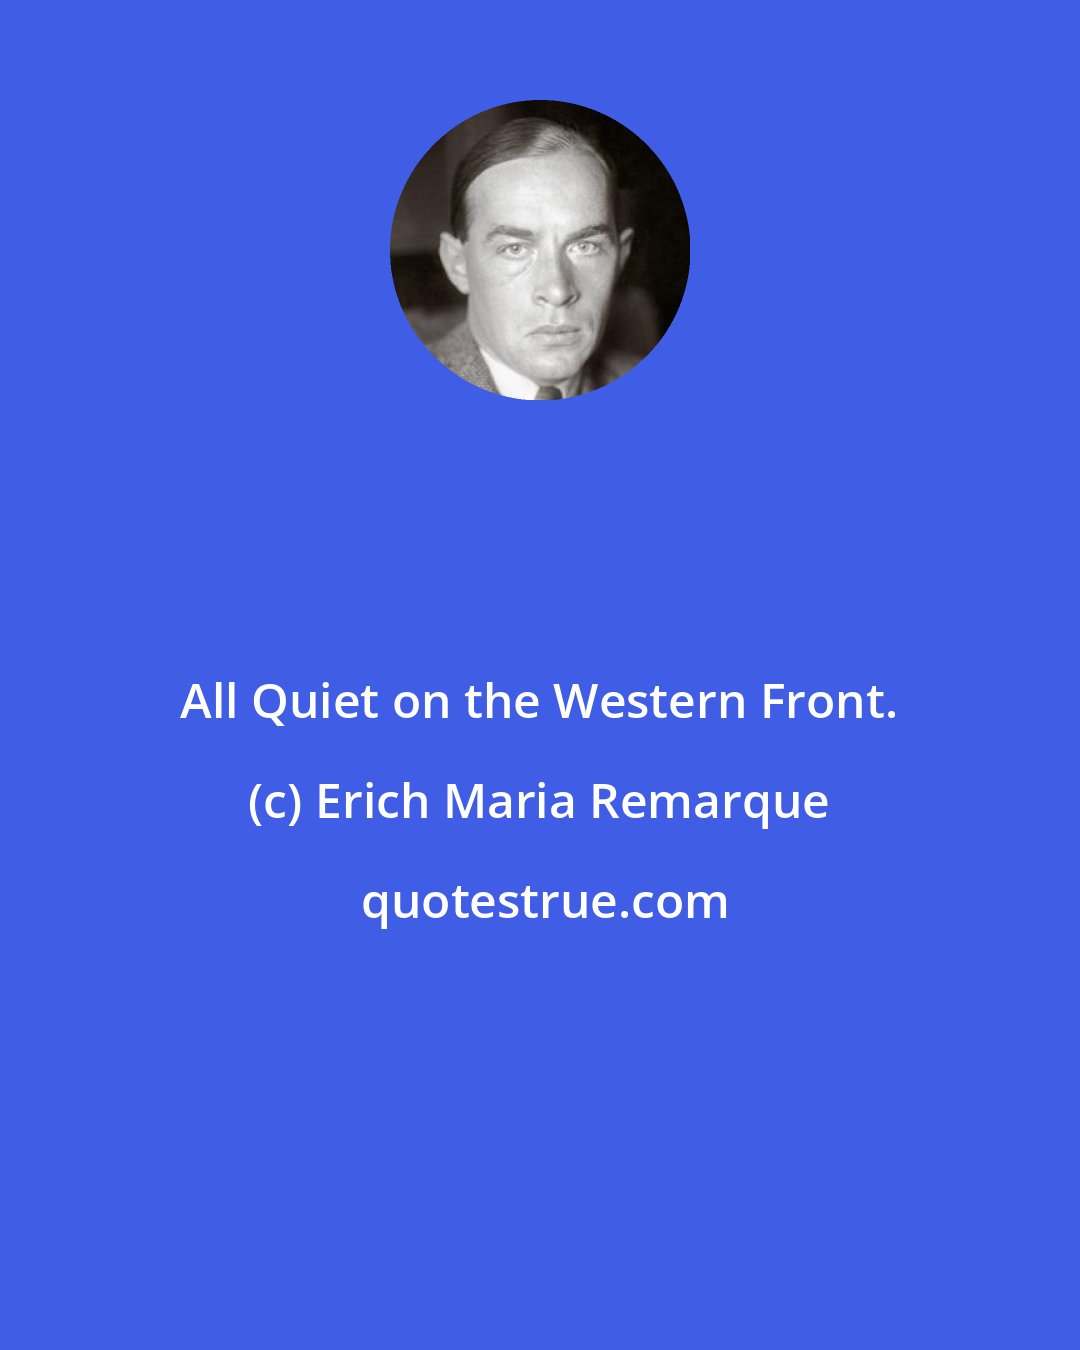 Erich Maria Remarque: All Quiet on the Western Front.